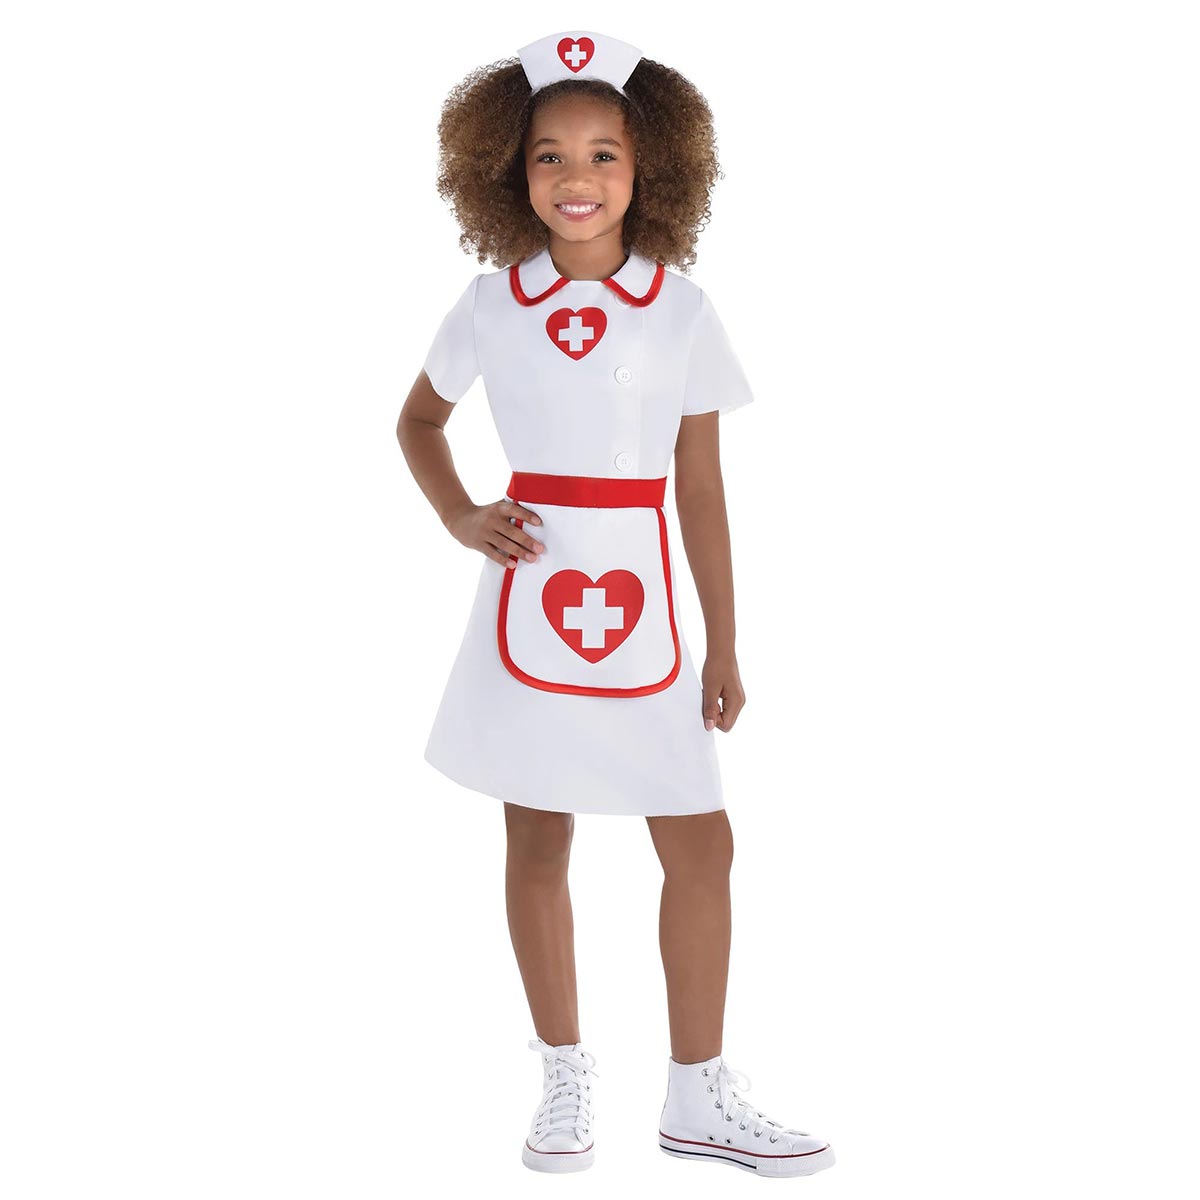 http://www.party-expert.com/cdn/shop/products/suit-yourself-costume-co-costumes-sweetheart-nurse-costume-for-kids-white-and-red-dress-32005228331194.jpg?v=1660025527&width=1200